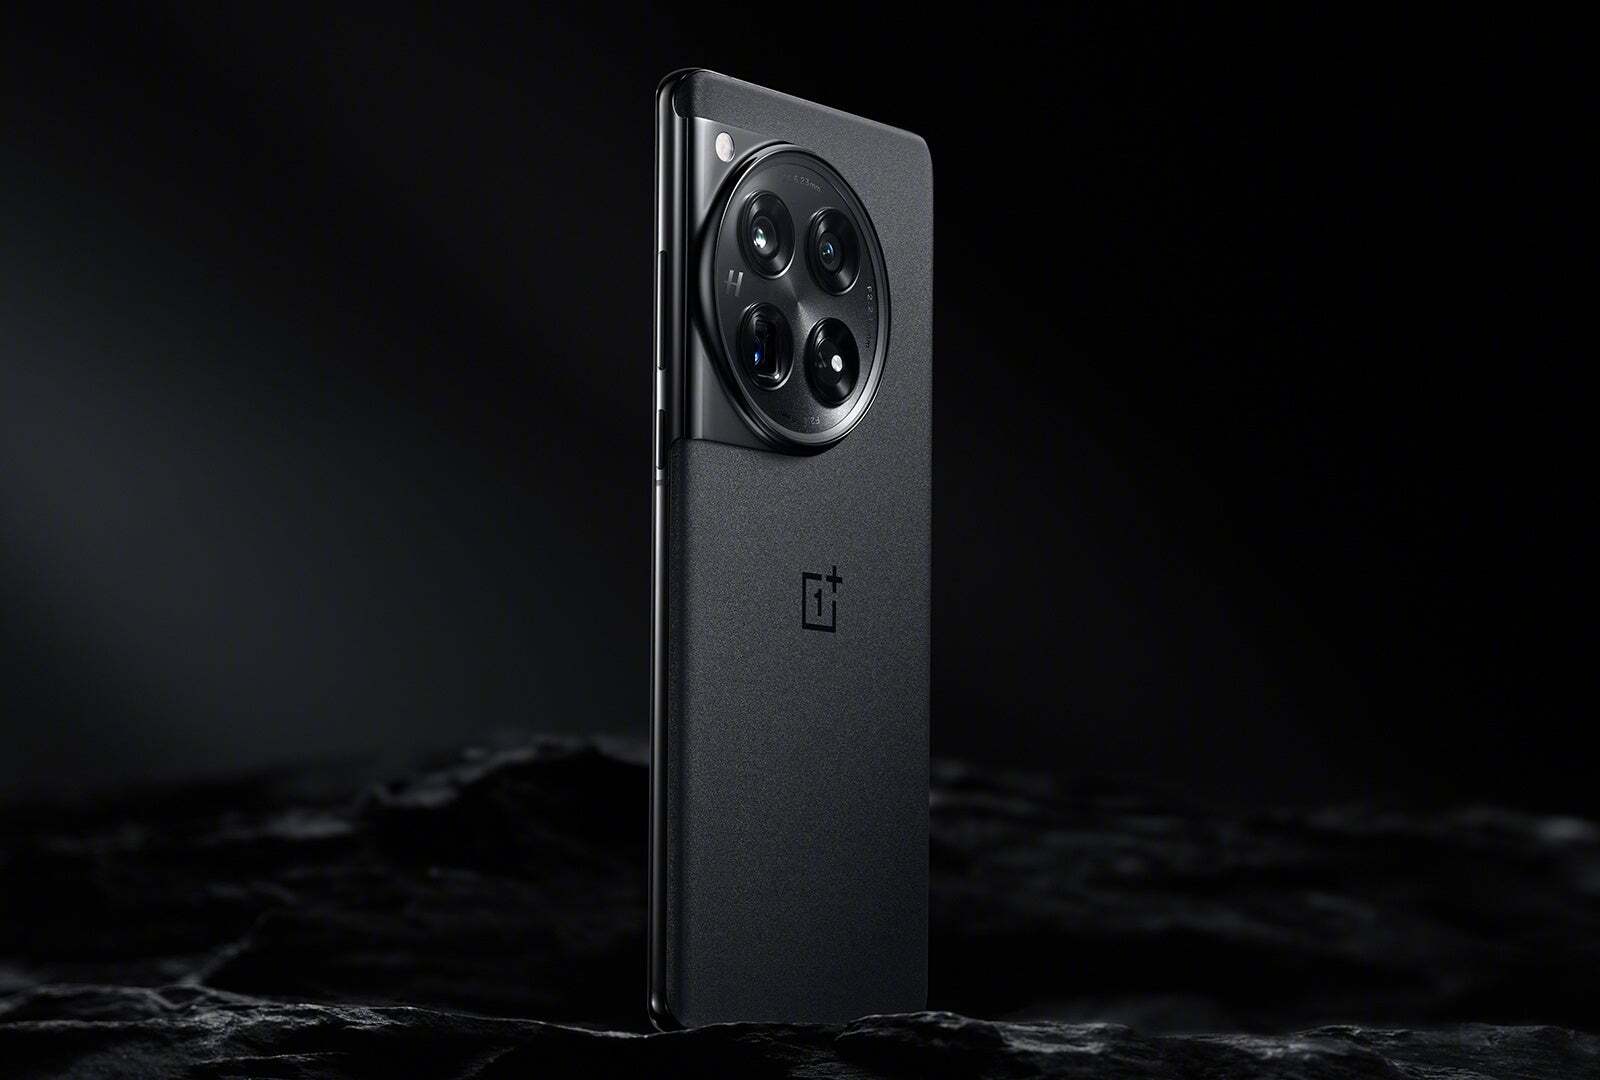 The OnePlus 12 in black (Image source - OnePlus) - OnePlus 12 colors: what to expect